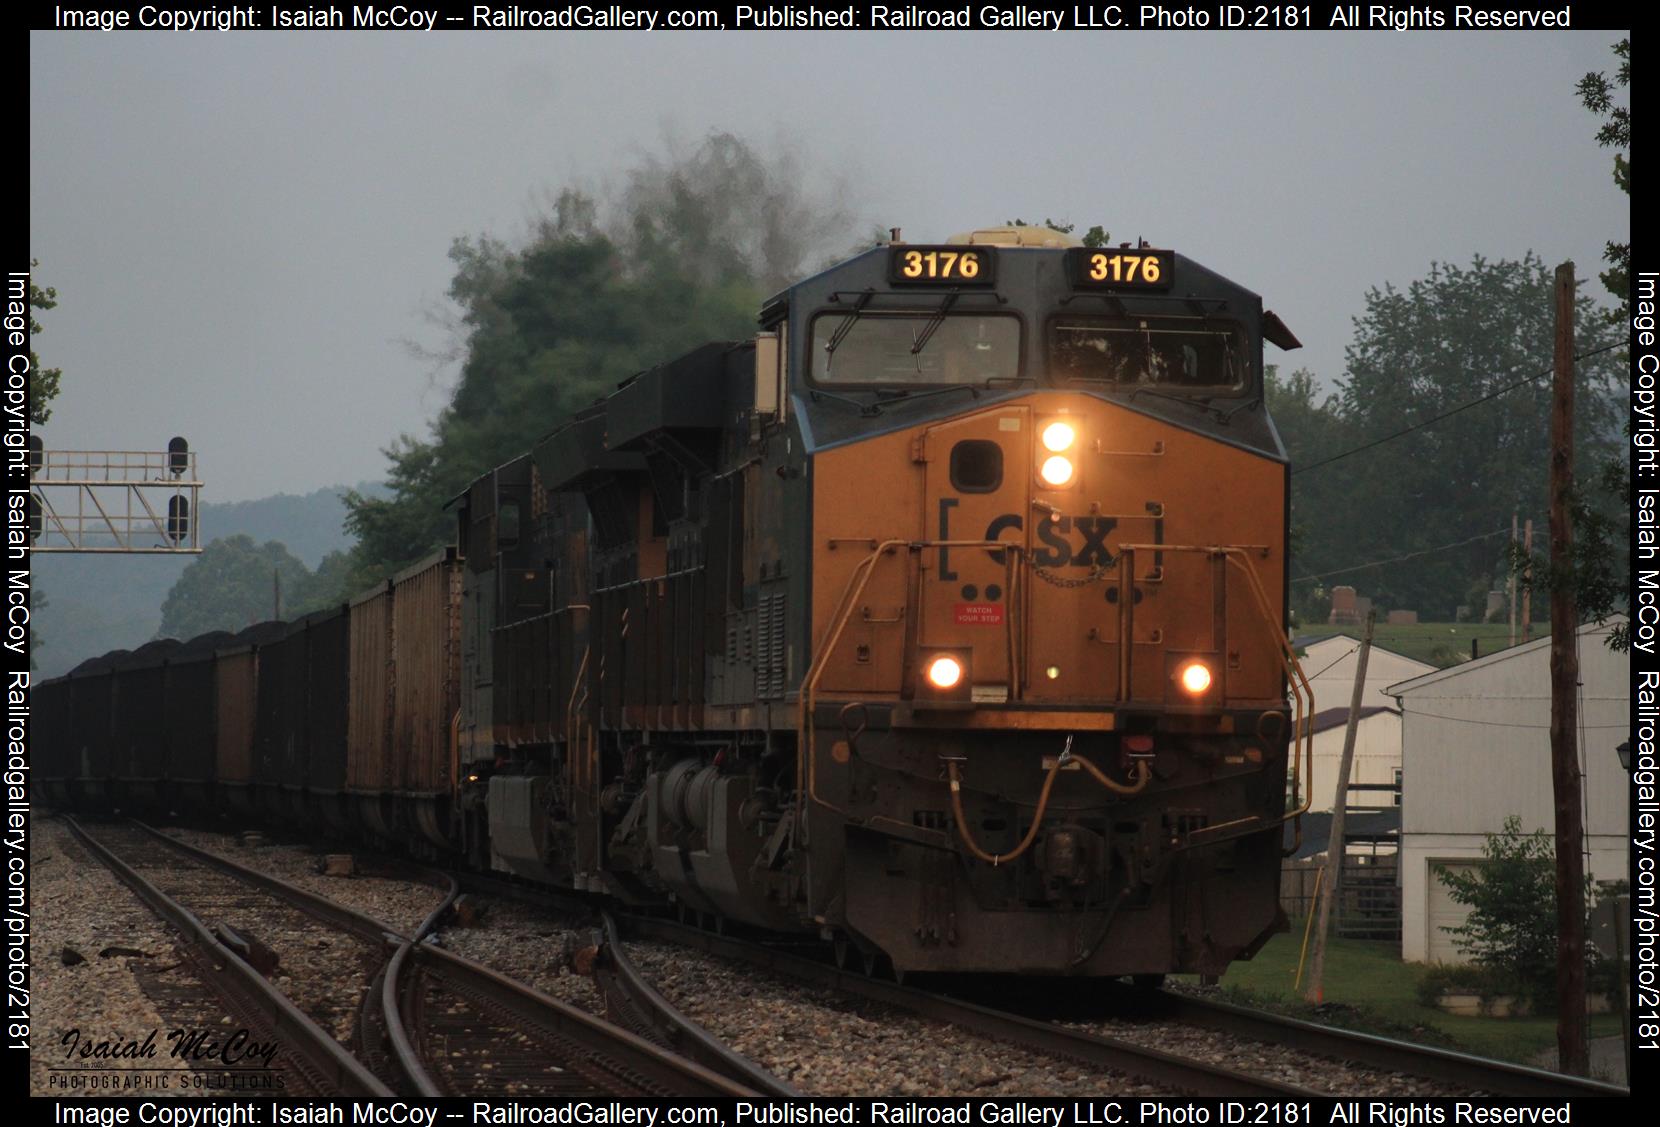 RM unknown/RN 3175 is a class GE ES44AH and  is pictured in Hurricane , WV, United States.  This was taken along the Kanawha Sub on the CSX Transportation. Photo Copyright: Isaiah McCoy uploaded to Railroad Gallery on 07/02/2023. This photograph of RM unknown/RN 3175 was taken on Tuesday, June 27, 2023. All Rights Reserved. 